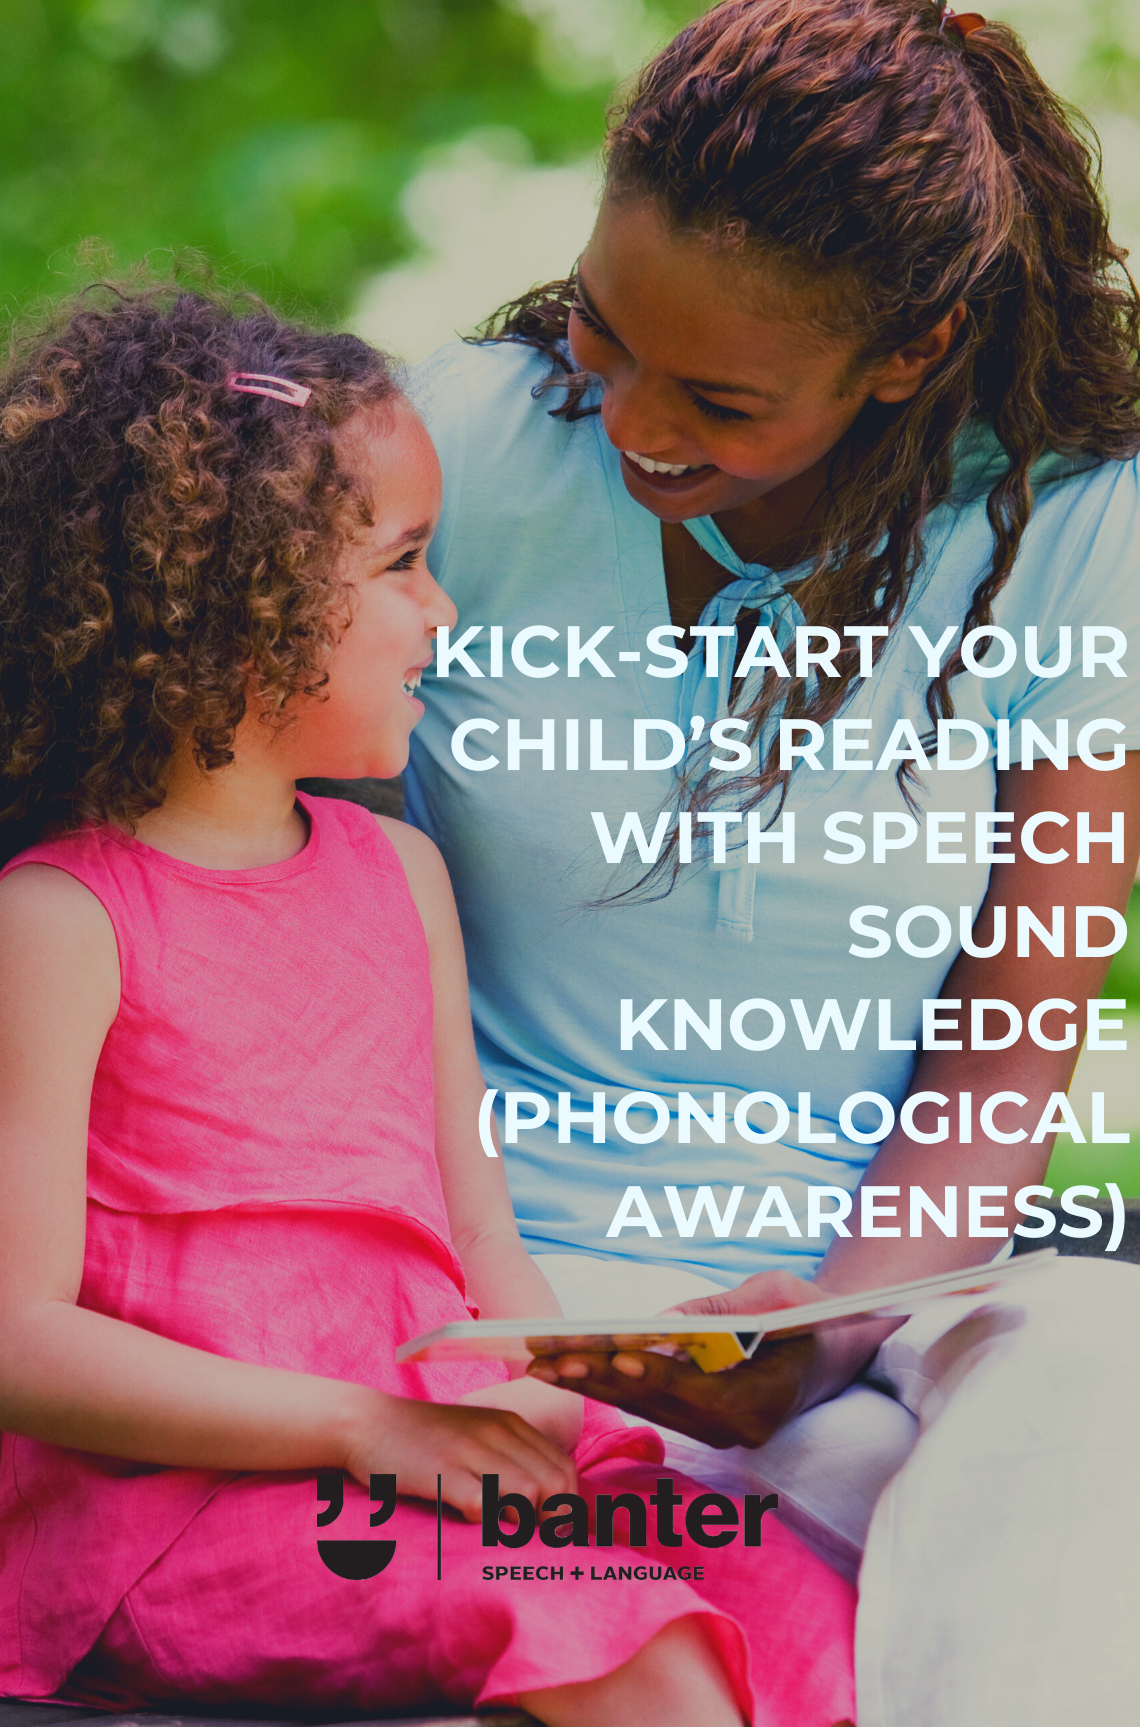 Kick-start your child’s reading with speech sound knowledge (phonological awareness)